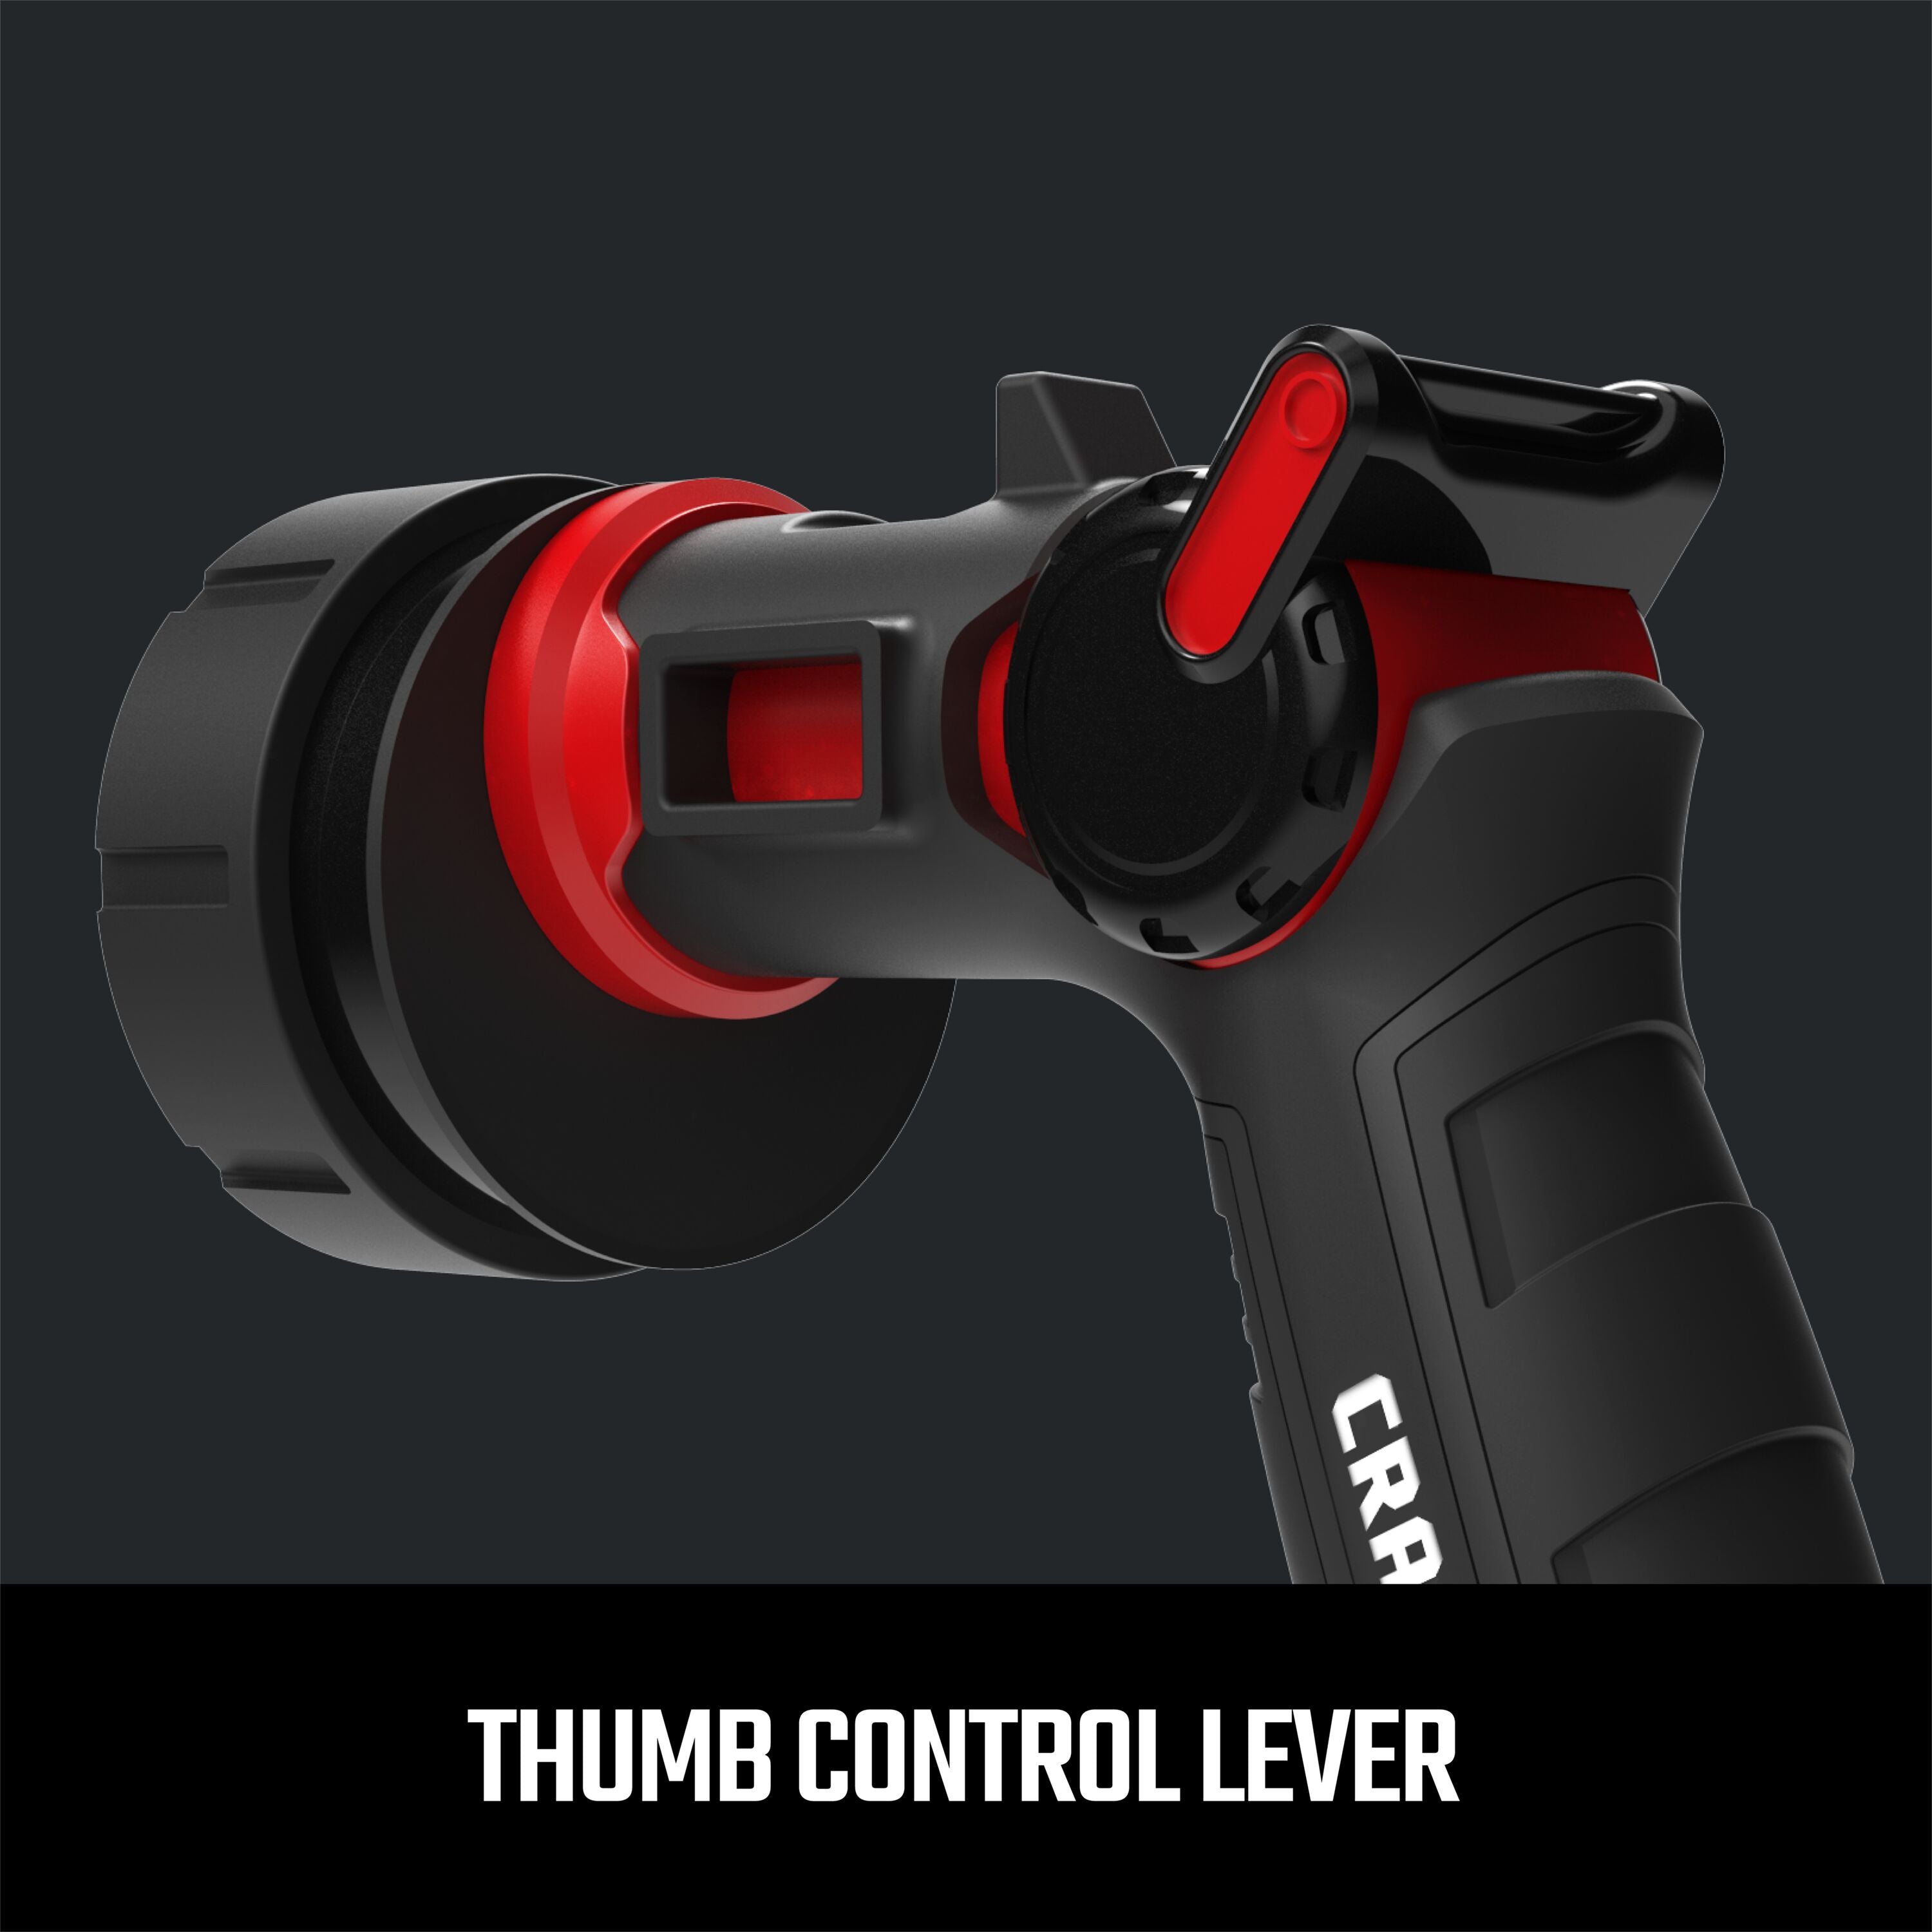 Black and red ultimate 7-pattern water nozzle with thumb control. Highlighting the thumb control lever graphic